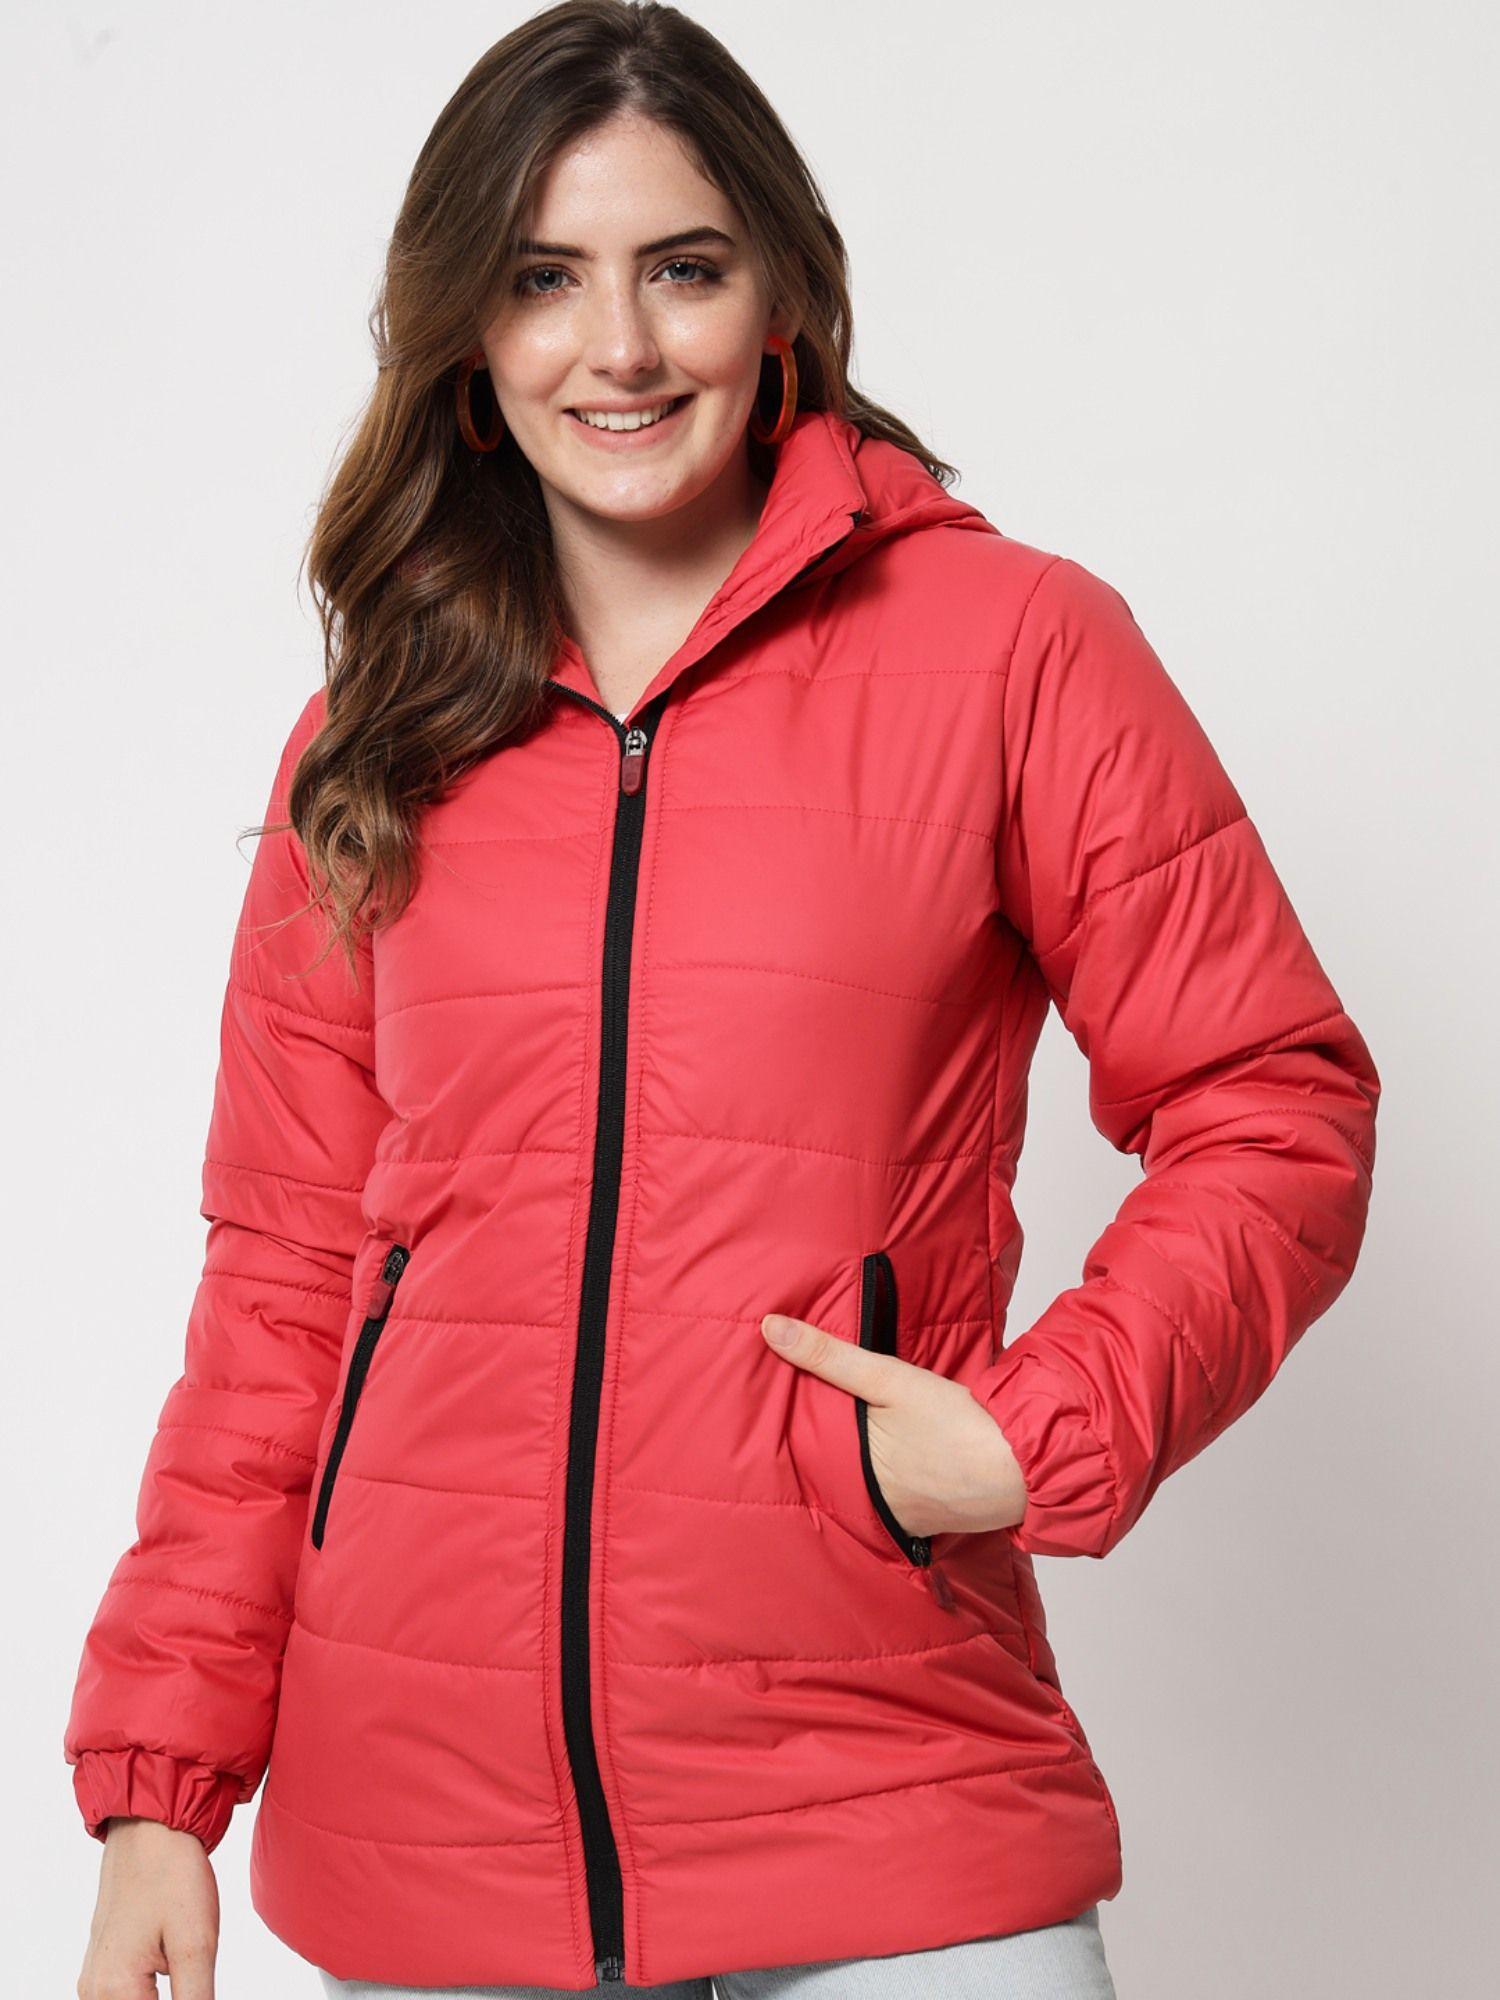 Full Sleeve Solid Women Red Puffer Jacket